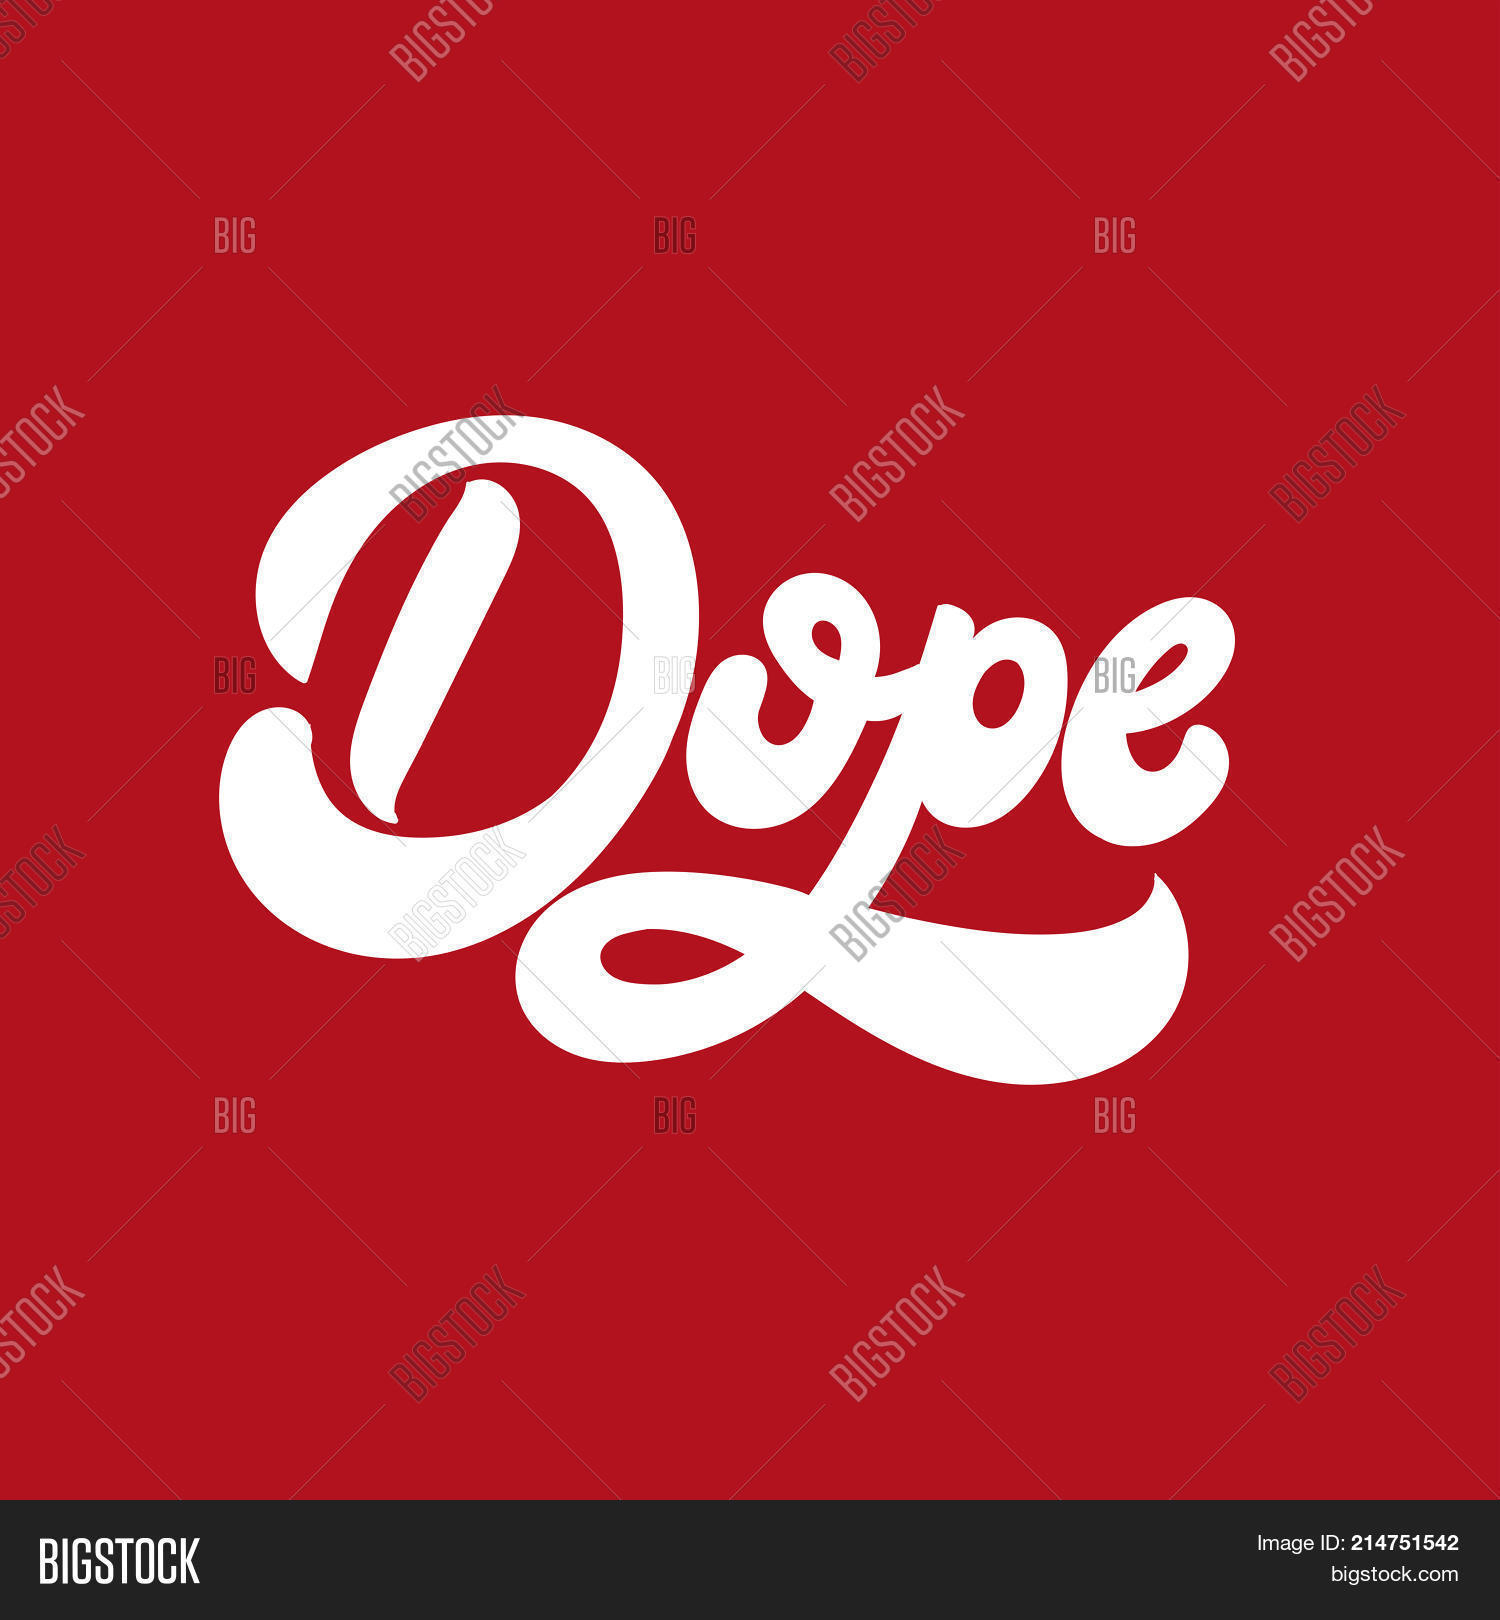 Dope. Vector Vector & Photo (Free Trial) | Bigstock With Regard To Dope Card Template